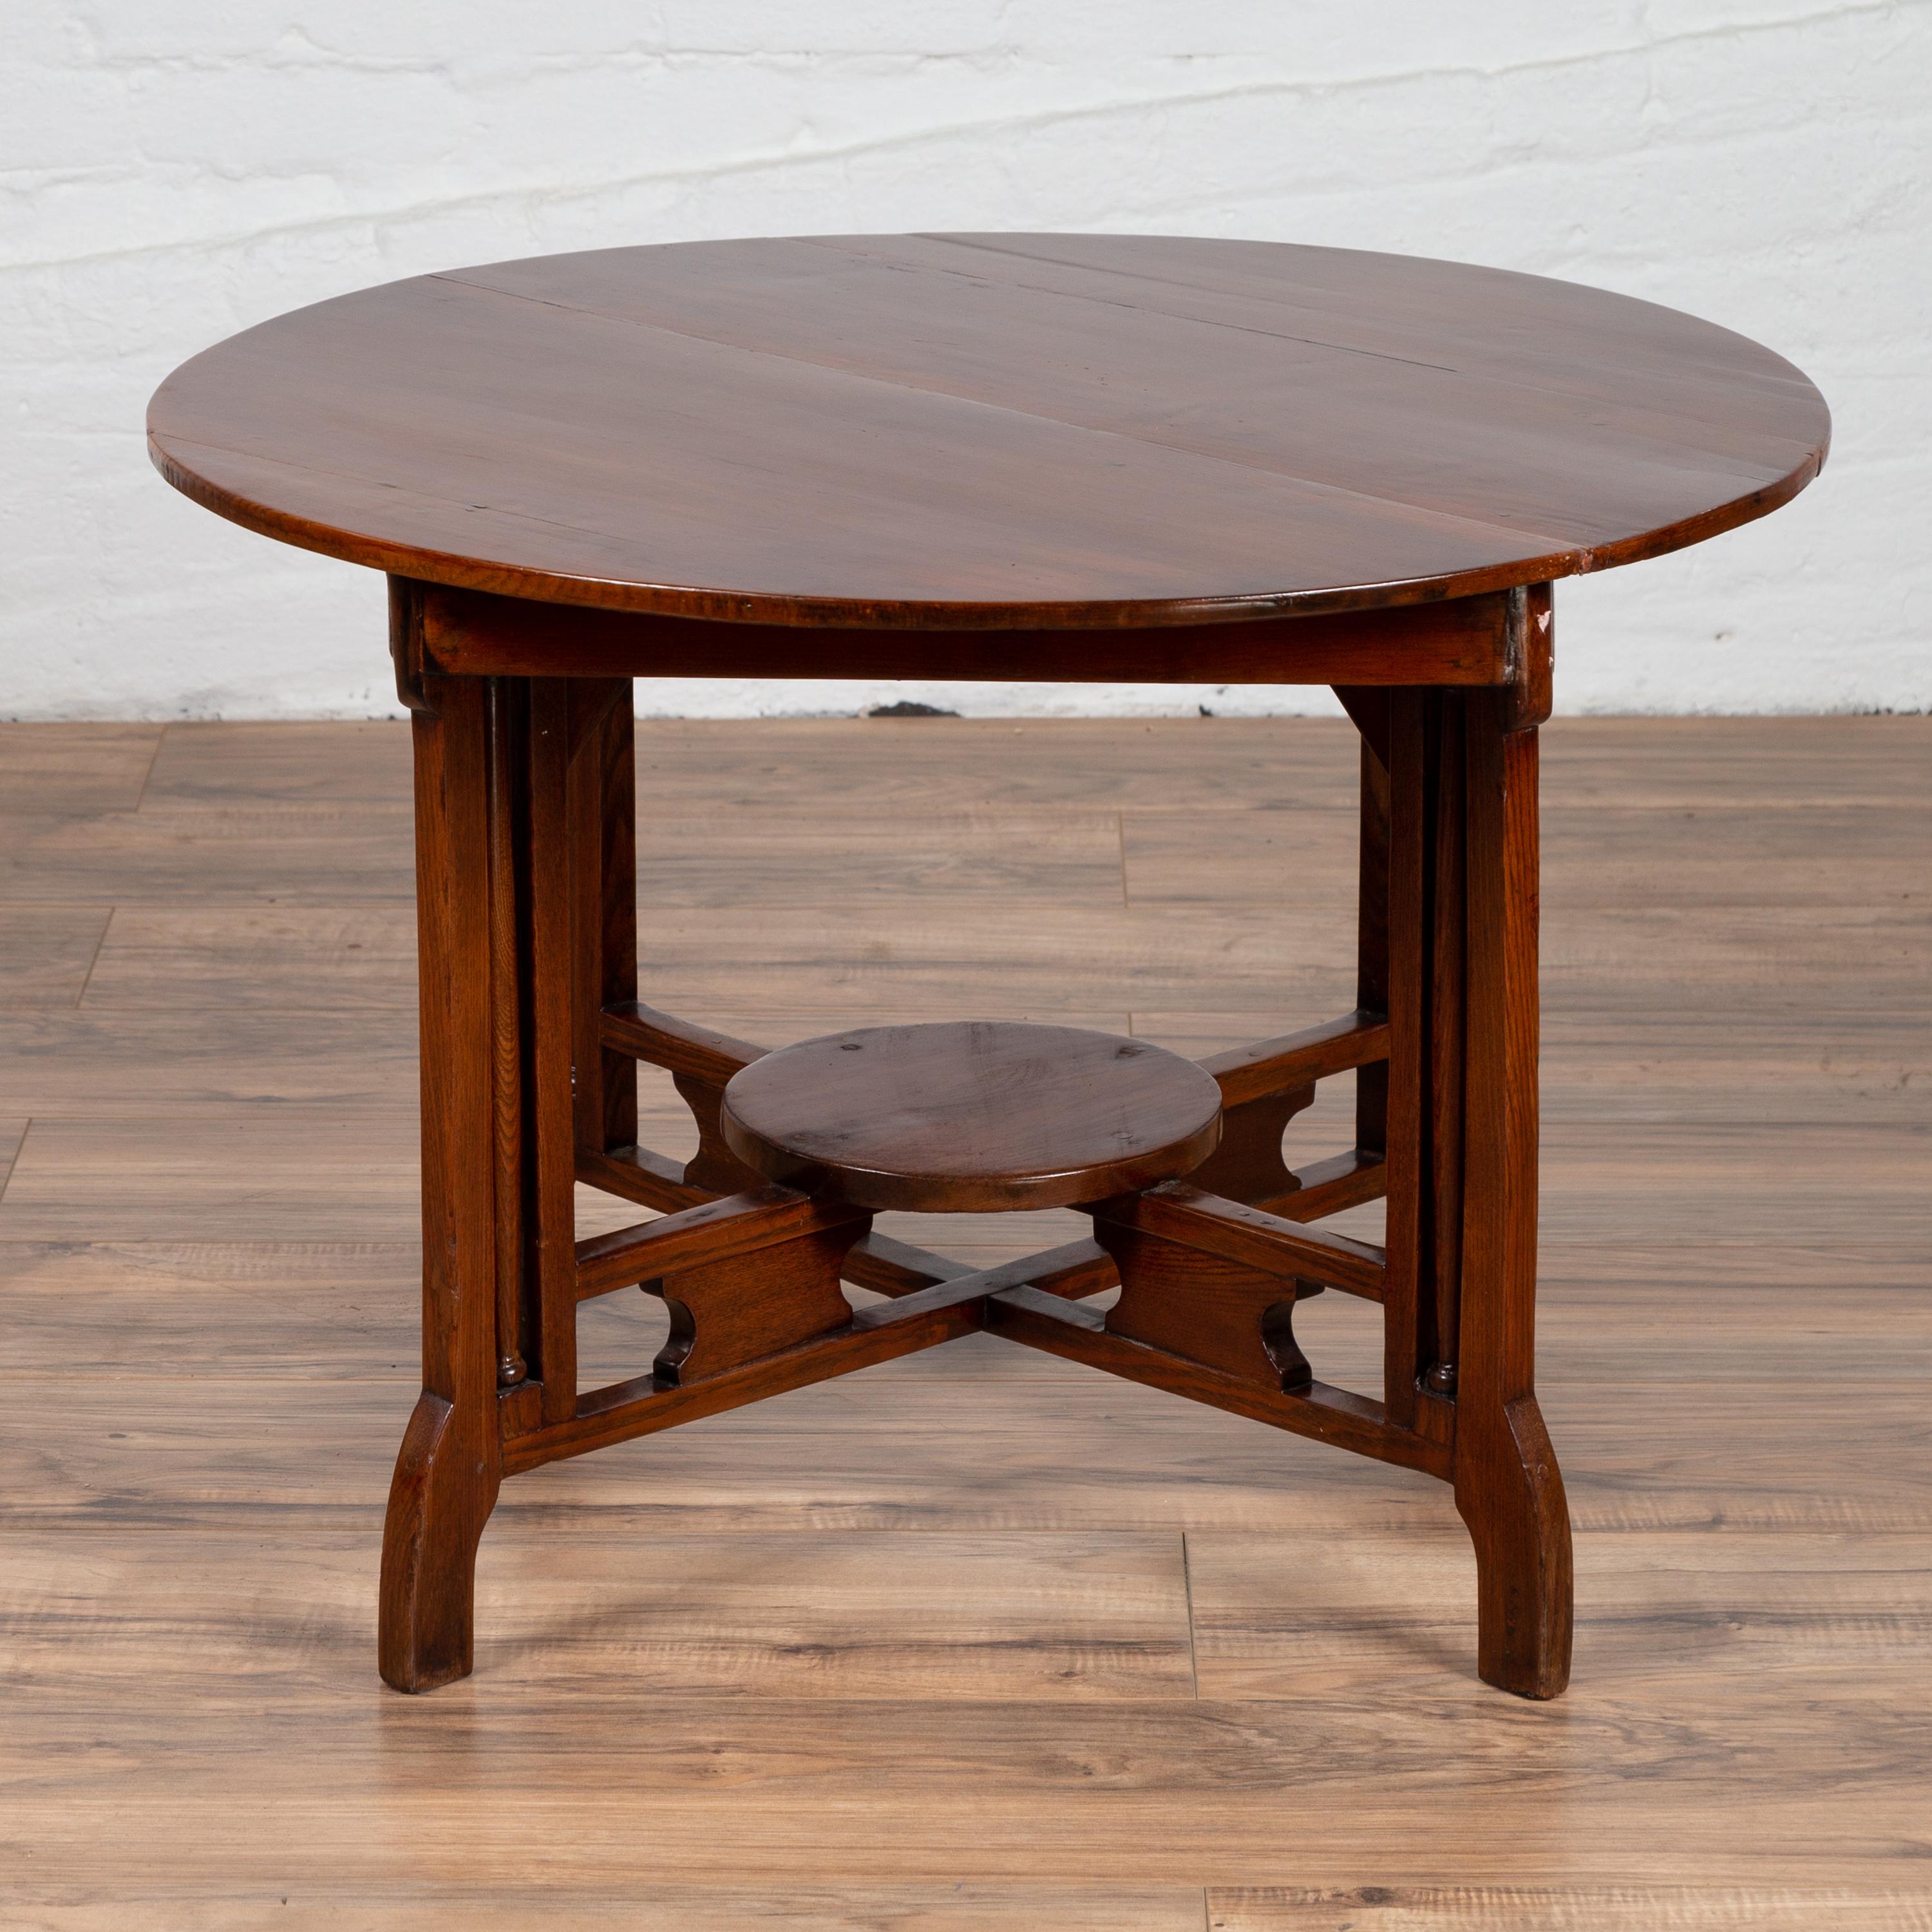 A vintage Chinese Art Deco style side table from the mid 20th century, with brown lacquer, round top and unusual base. Born in China during the midcentury period, this Chinese table presents the stylistic characteristics of the Art Deco style.